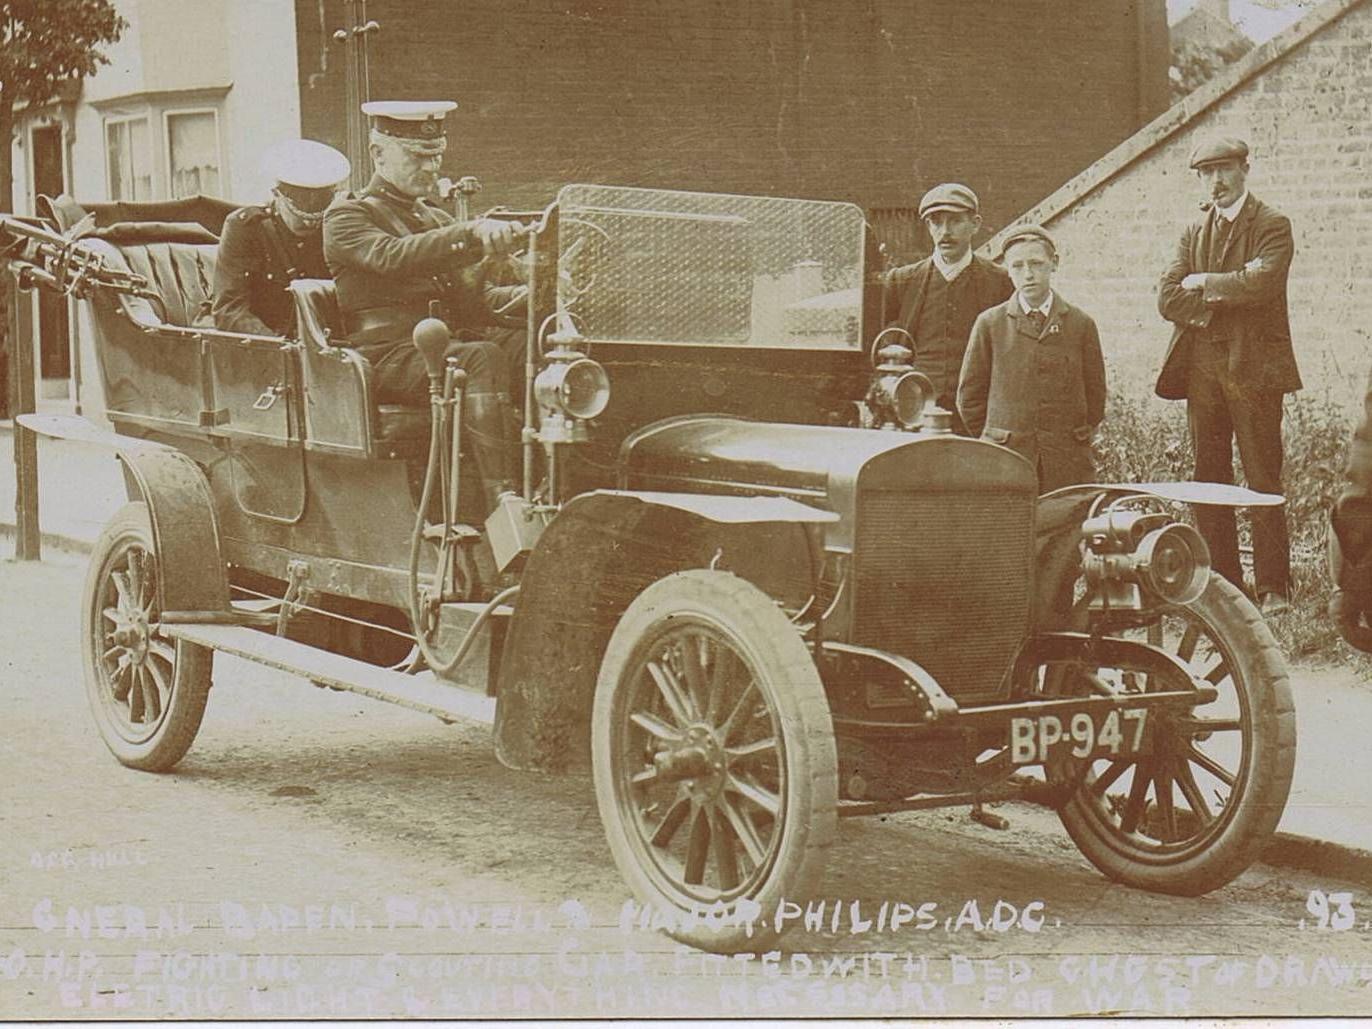 The 5th Territorial Force Battalion, with Gen. Baden Powell and Maj. Philips A.D.C. sitting in a 90 HP fighting or scouting car, fitted with bed, chest of drawers, electric light and everything necessary for war. Taken near Flanders Road, Railway Bridge, Bridlington when at annual camp in Bridlington, 4th-8th July 1908